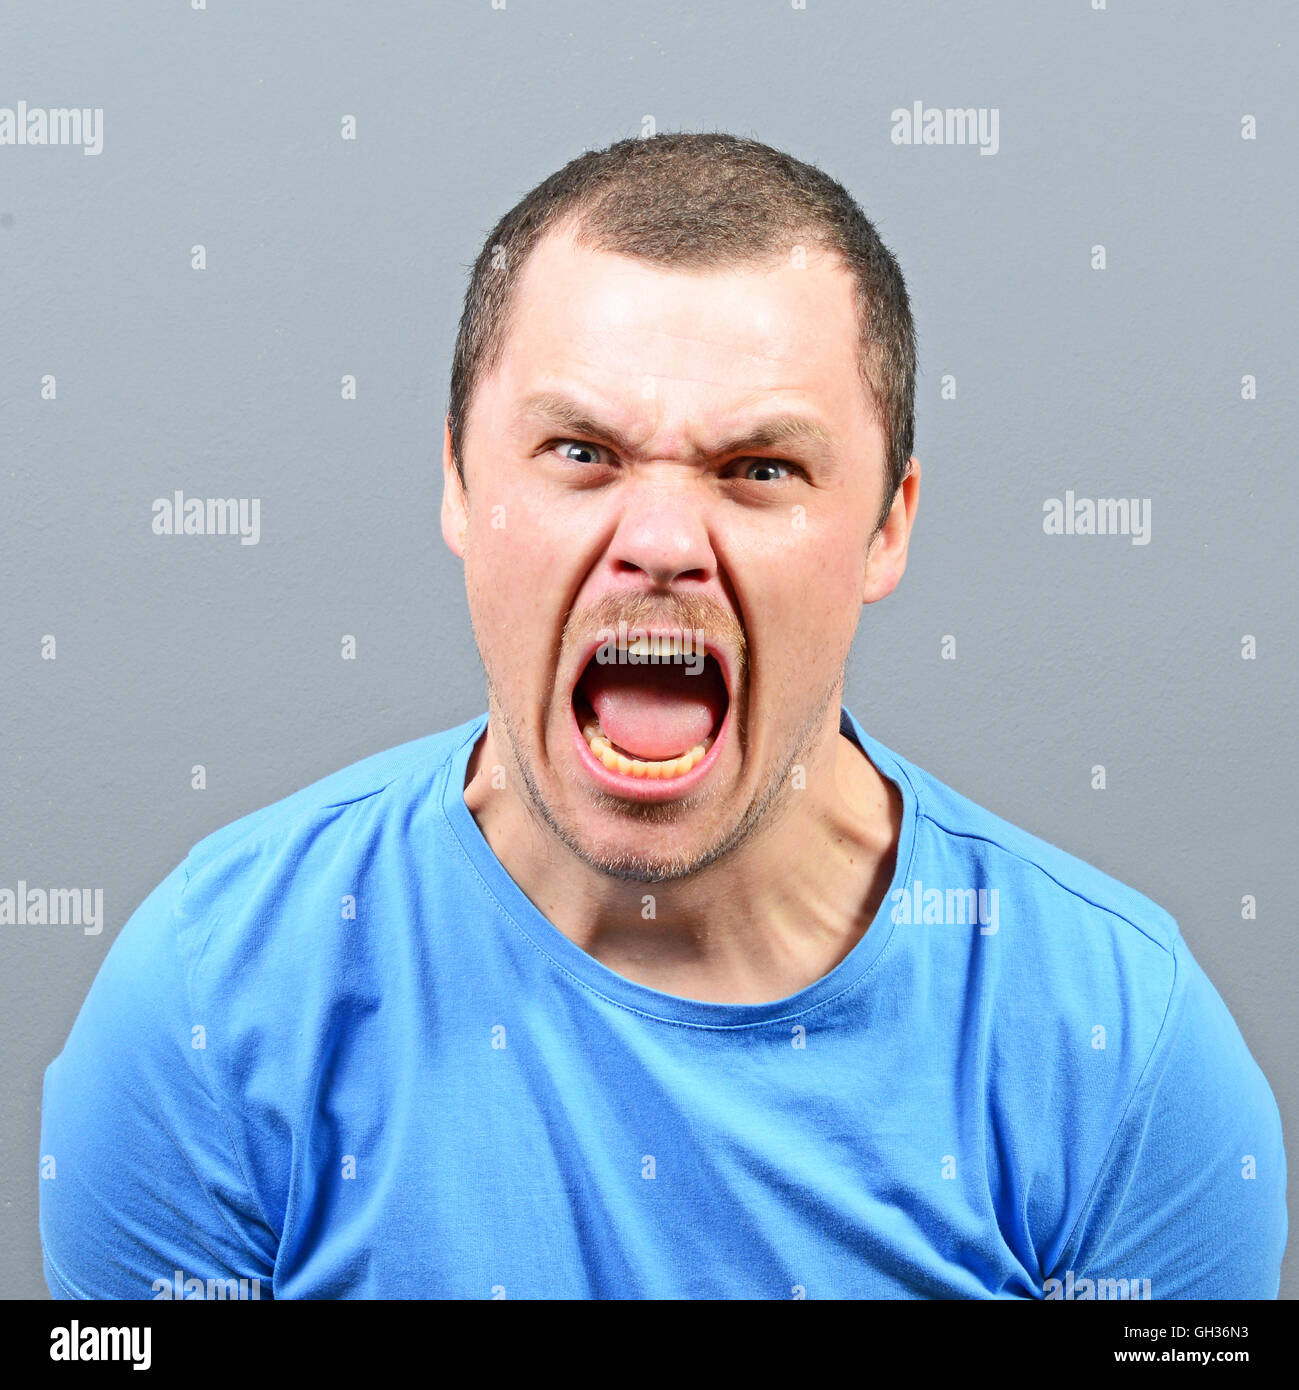 Angry Person Face